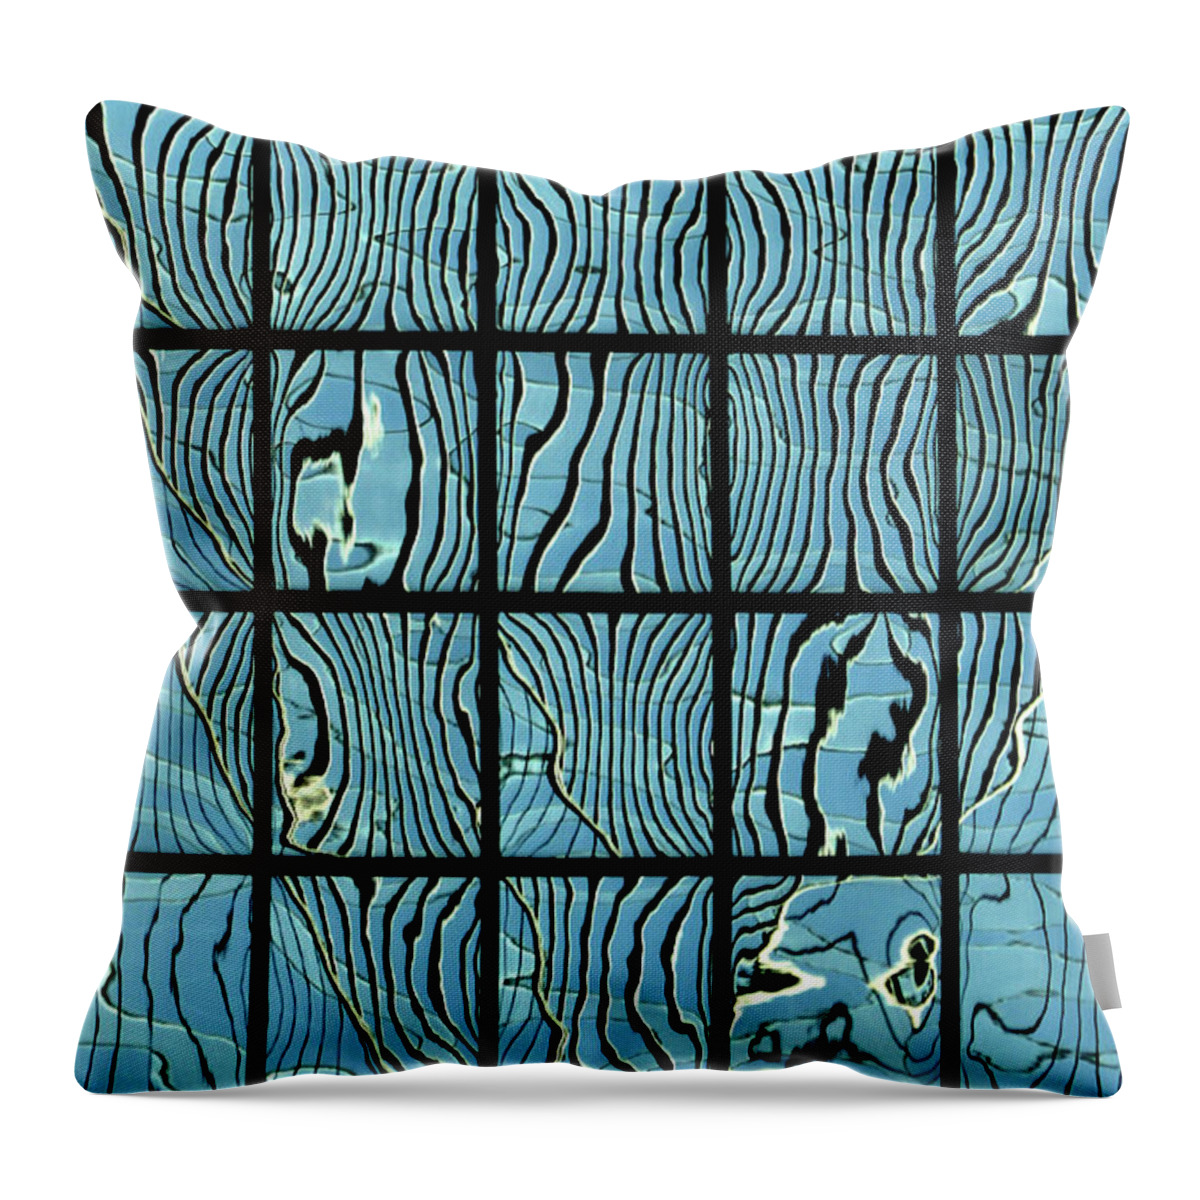 Urban Throw Pillow featuring the photograph Abstritecture 14 by Stuart Allen